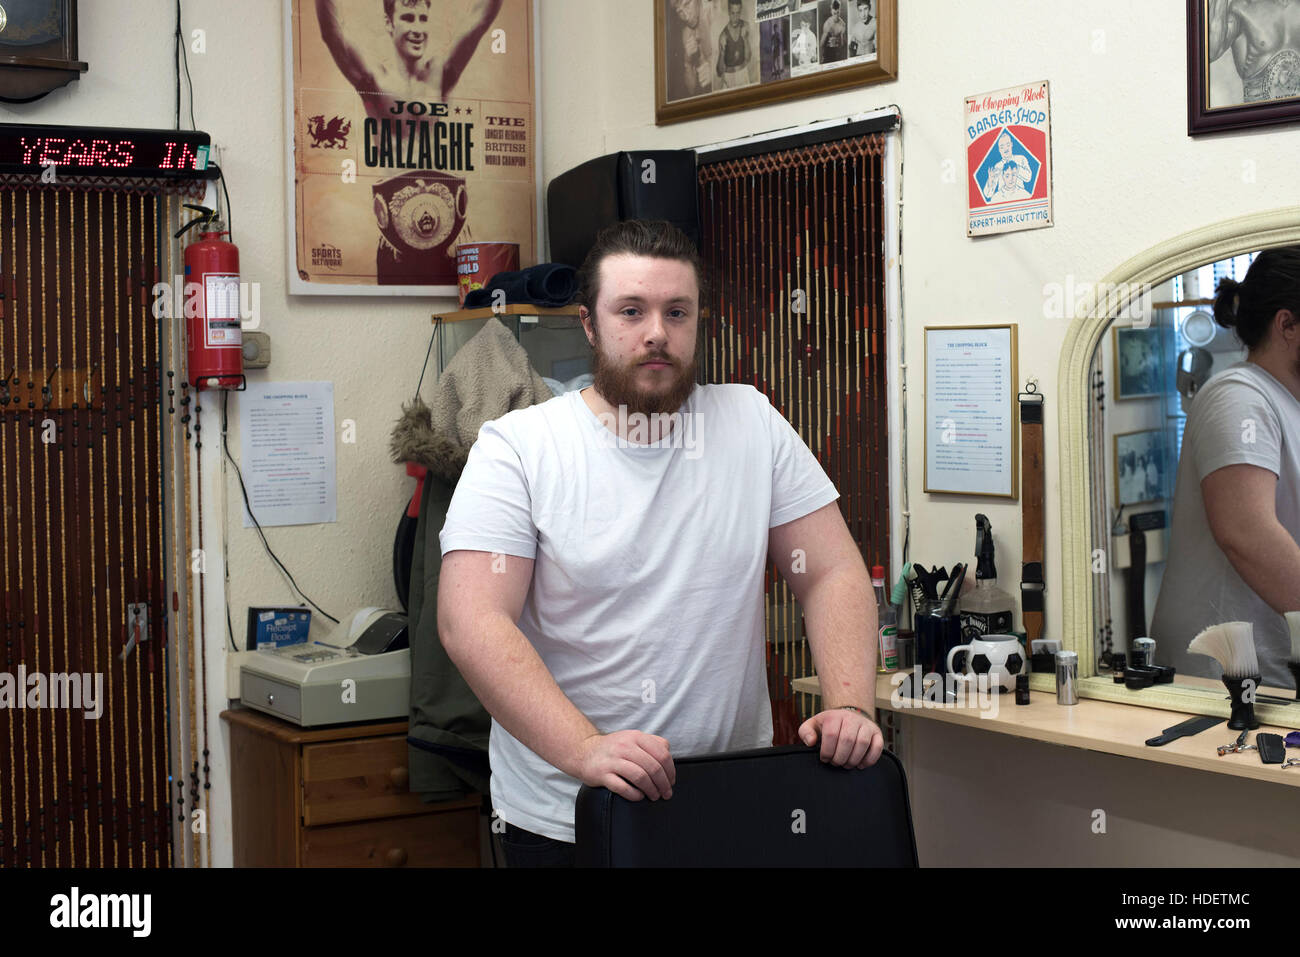 Caerphilly, Wales. November 2016. The Chopping Block Barber shop. Joe Black - Barber, photographed in his families barber shop. © Gemz Ali - Freelance Stock Photo